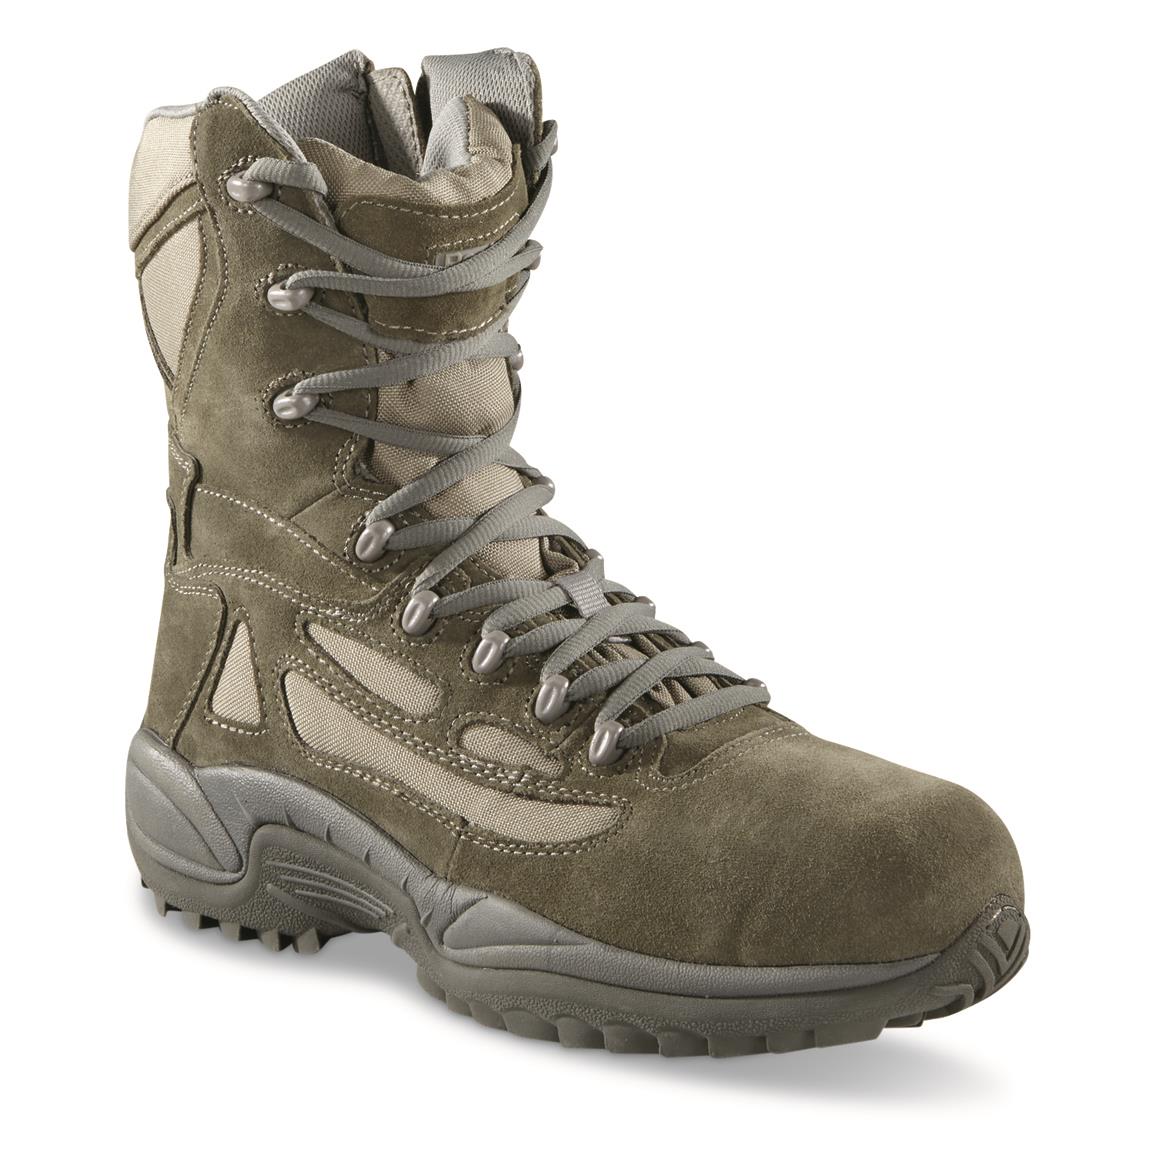 Suede leather and ripstop nylon uppers, Olive Drab